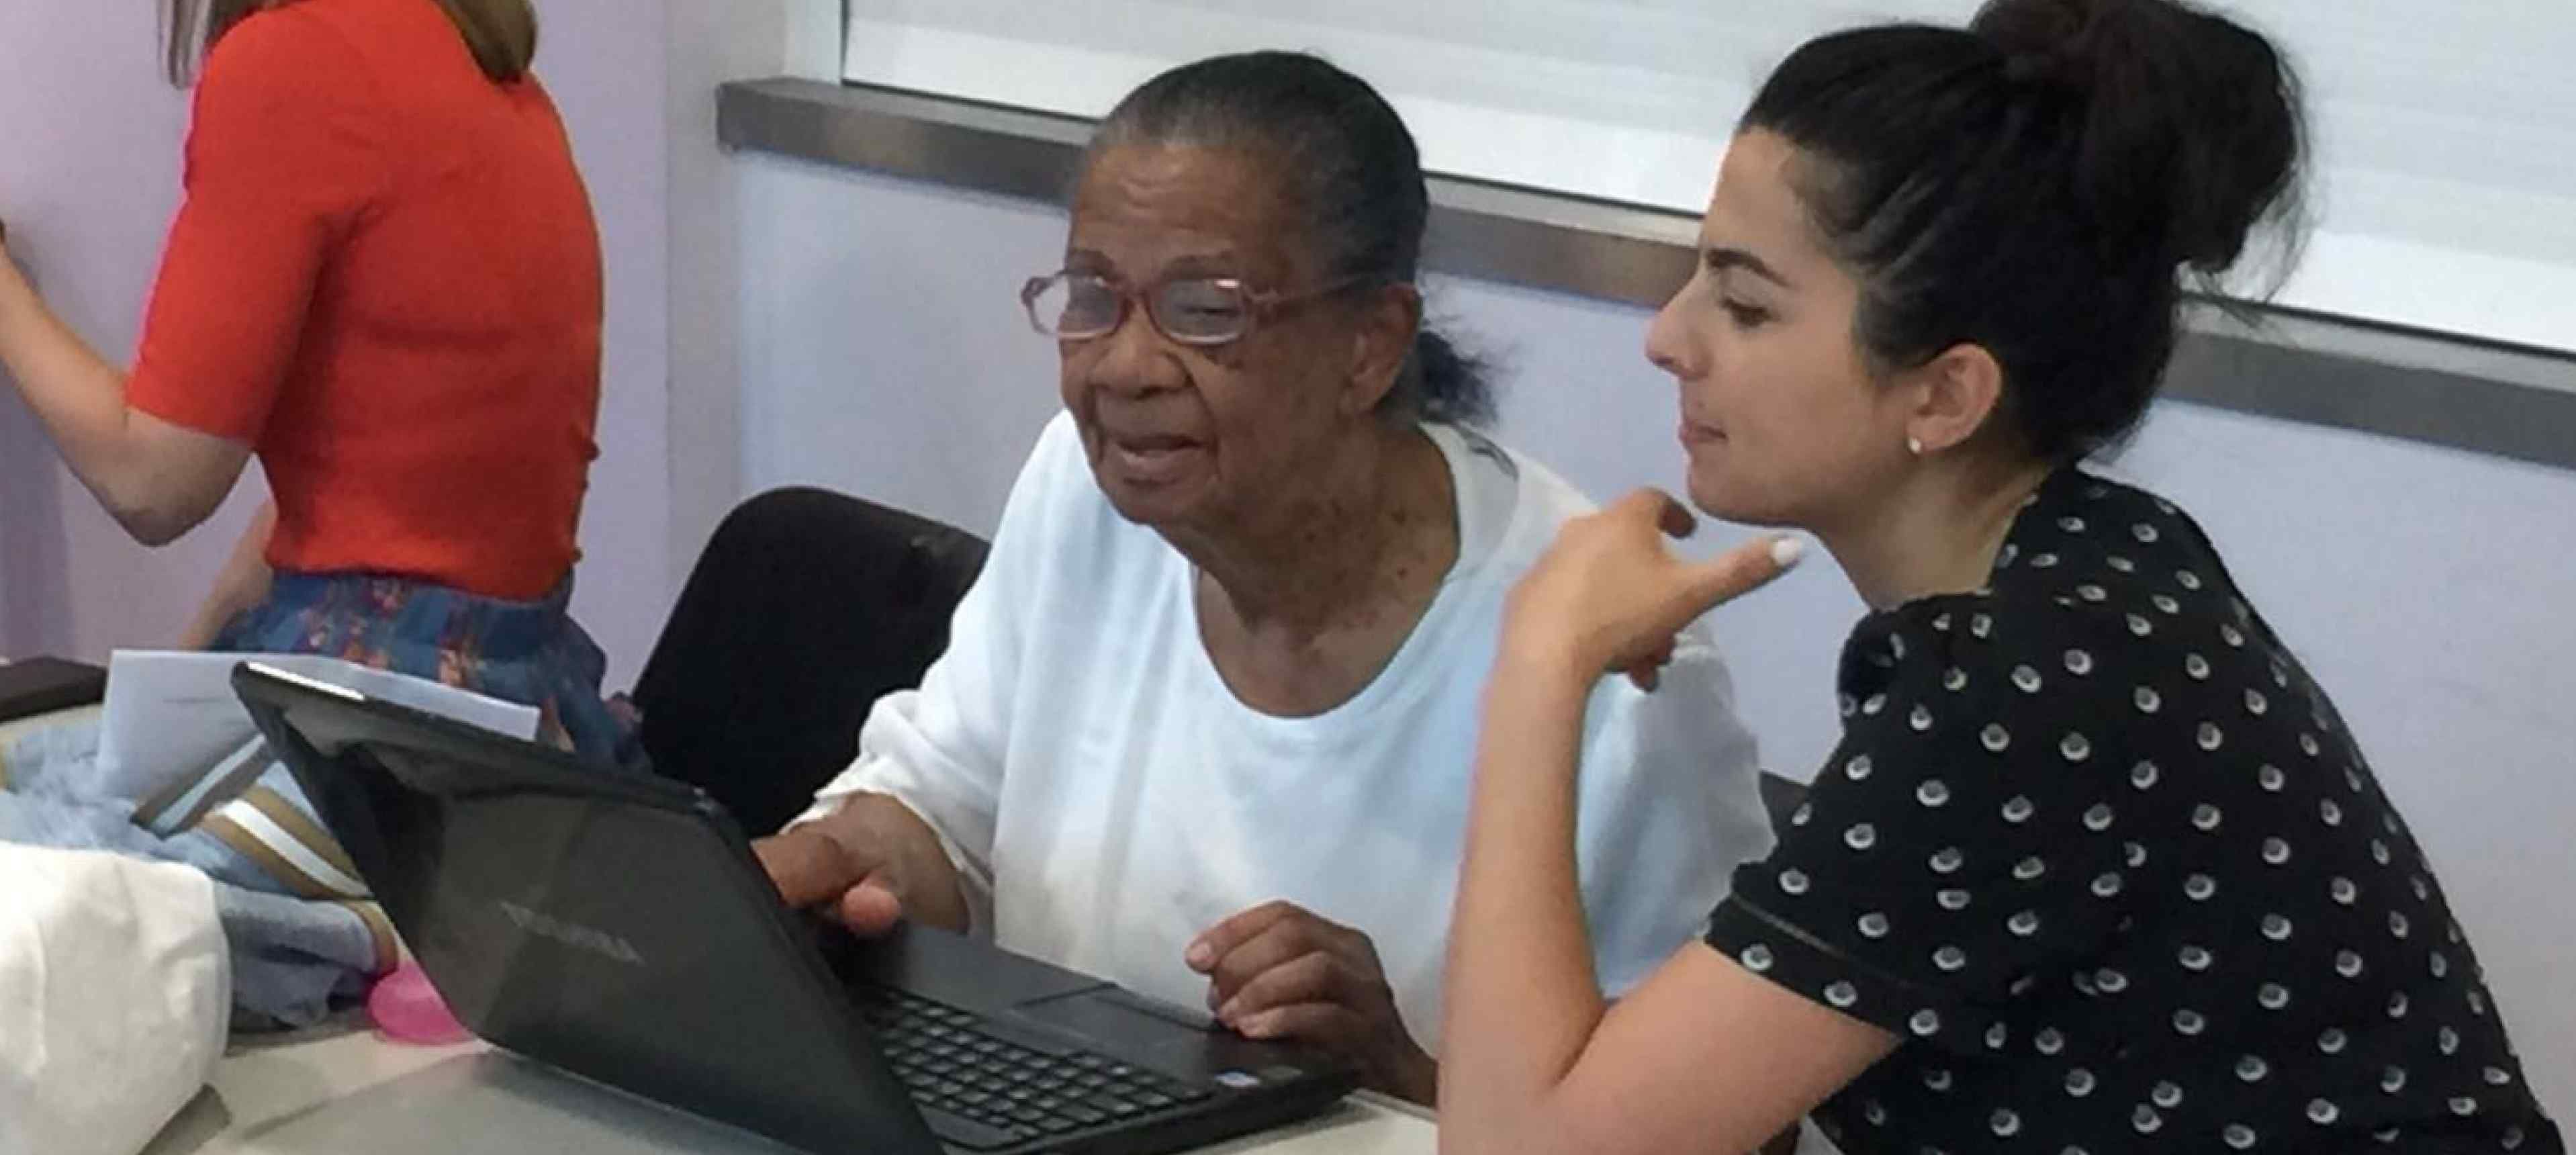 A local resident being shown how to use her laptop at What the Tech